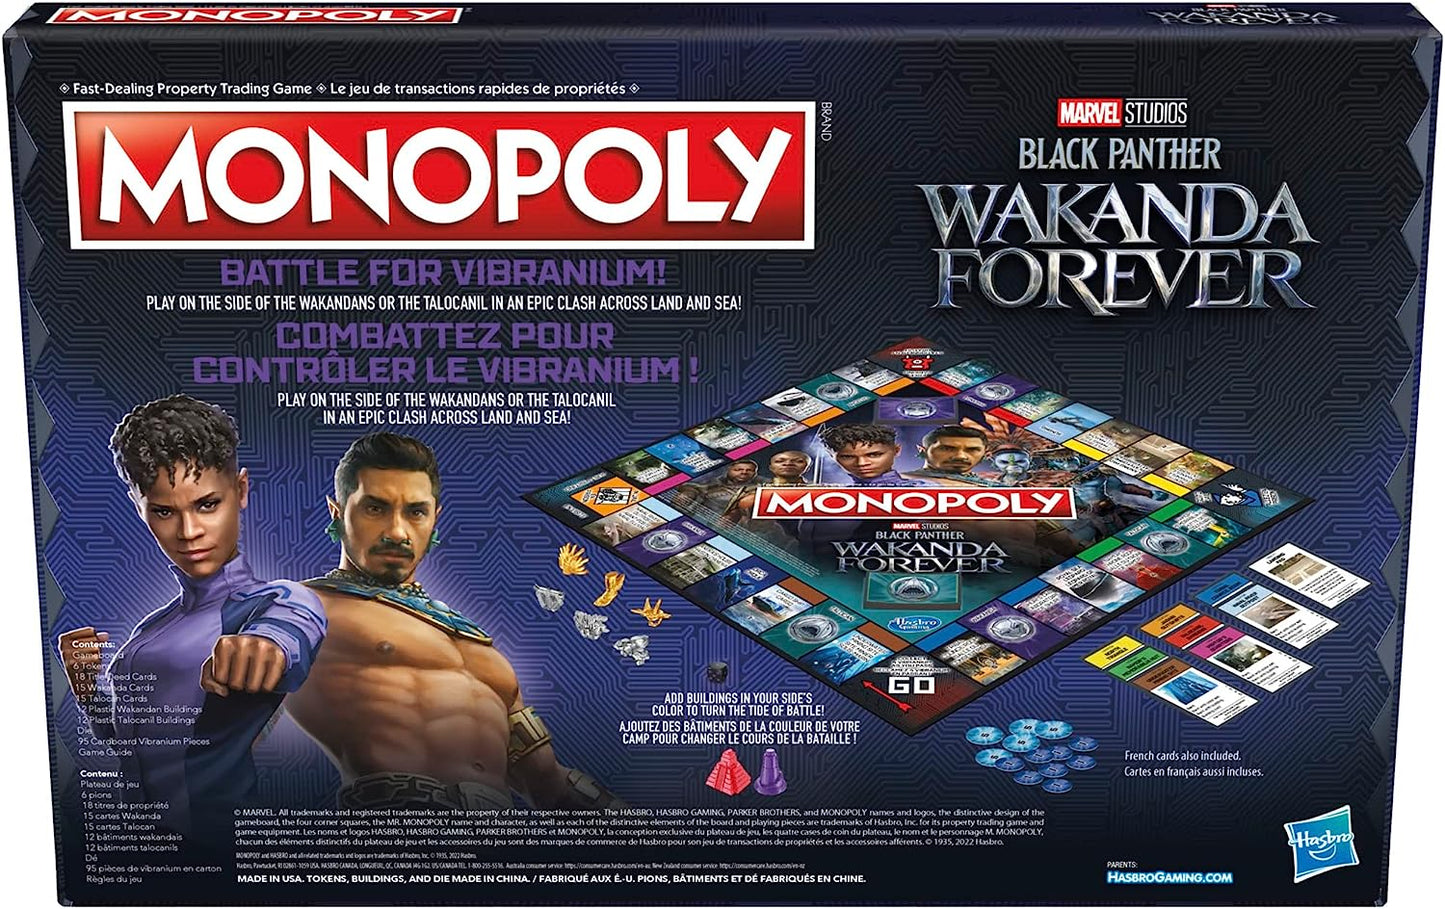 MONOPOLY BLACK PANTHER 2 Wakanda Forever